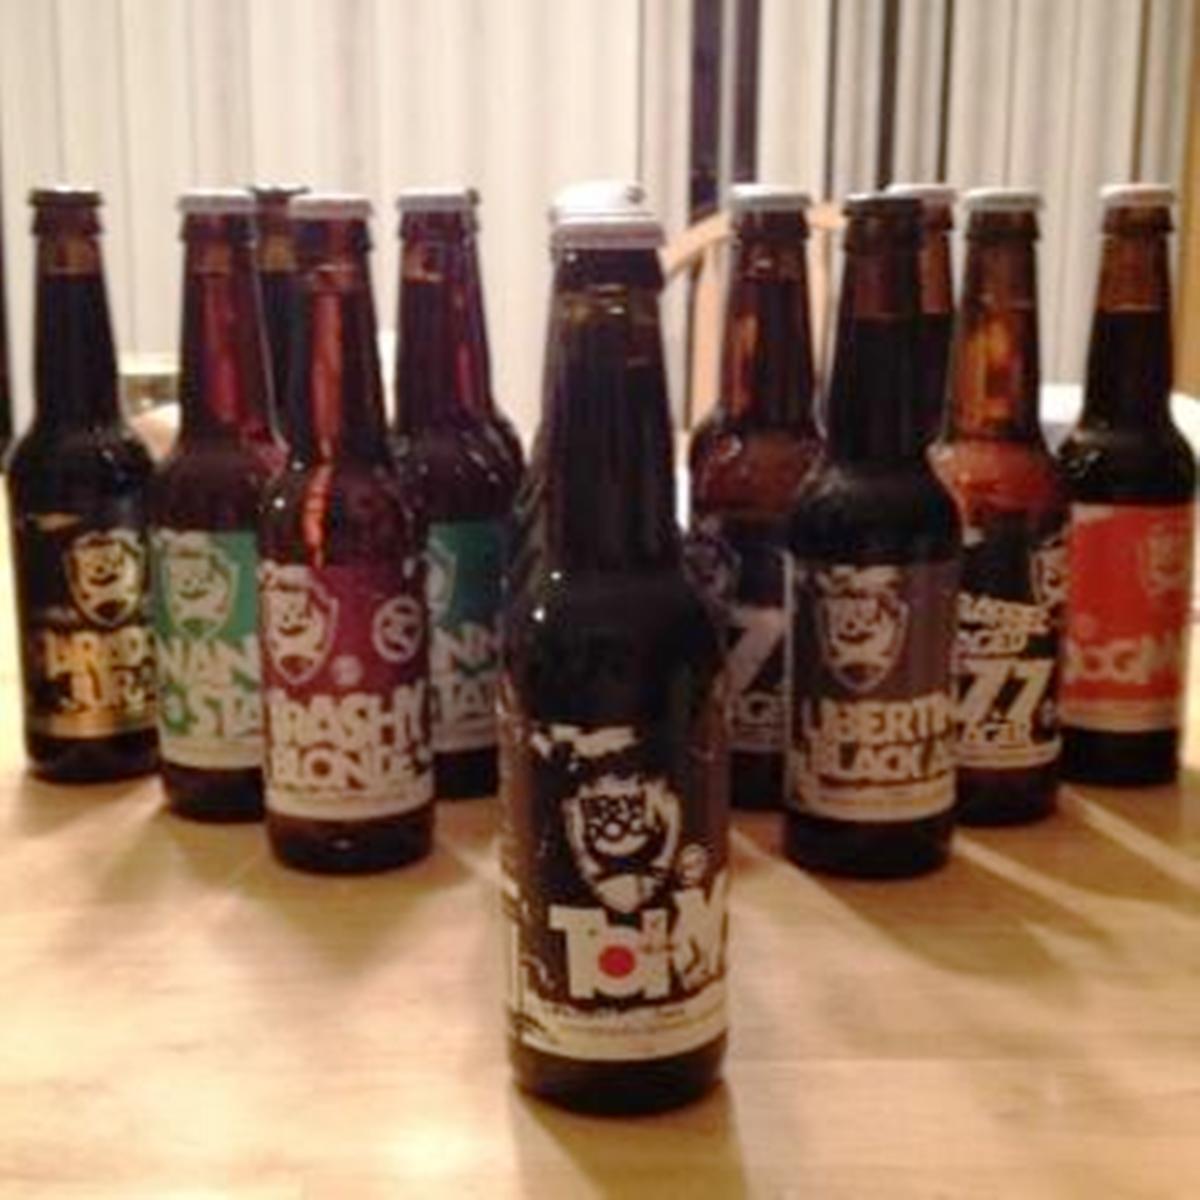 Beer selections from Brew Dog in Scotland